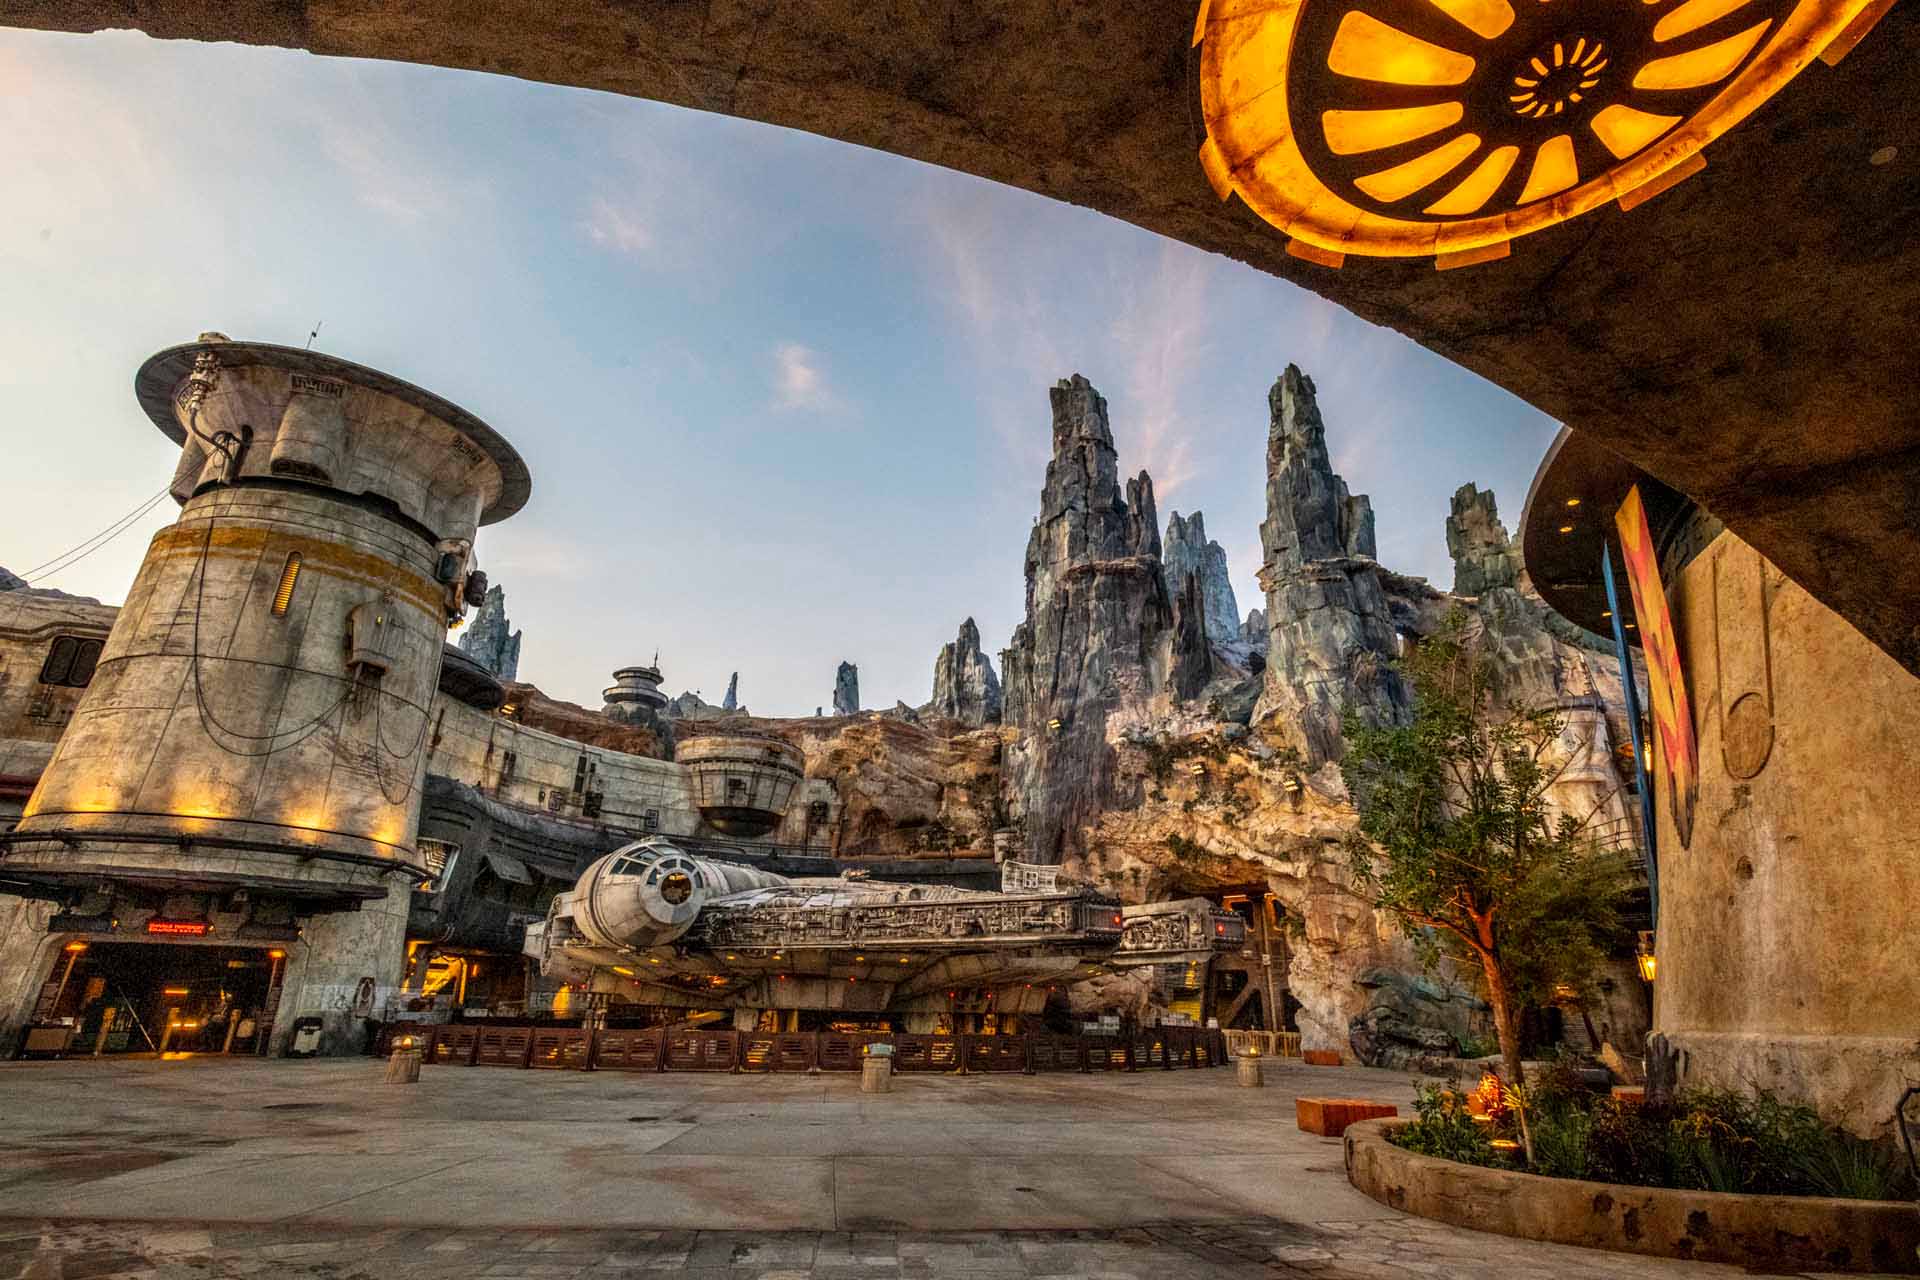 View of the Millennium Falcon at Star Wars: Galaxy's Edge in Disney's Hollywood Studios